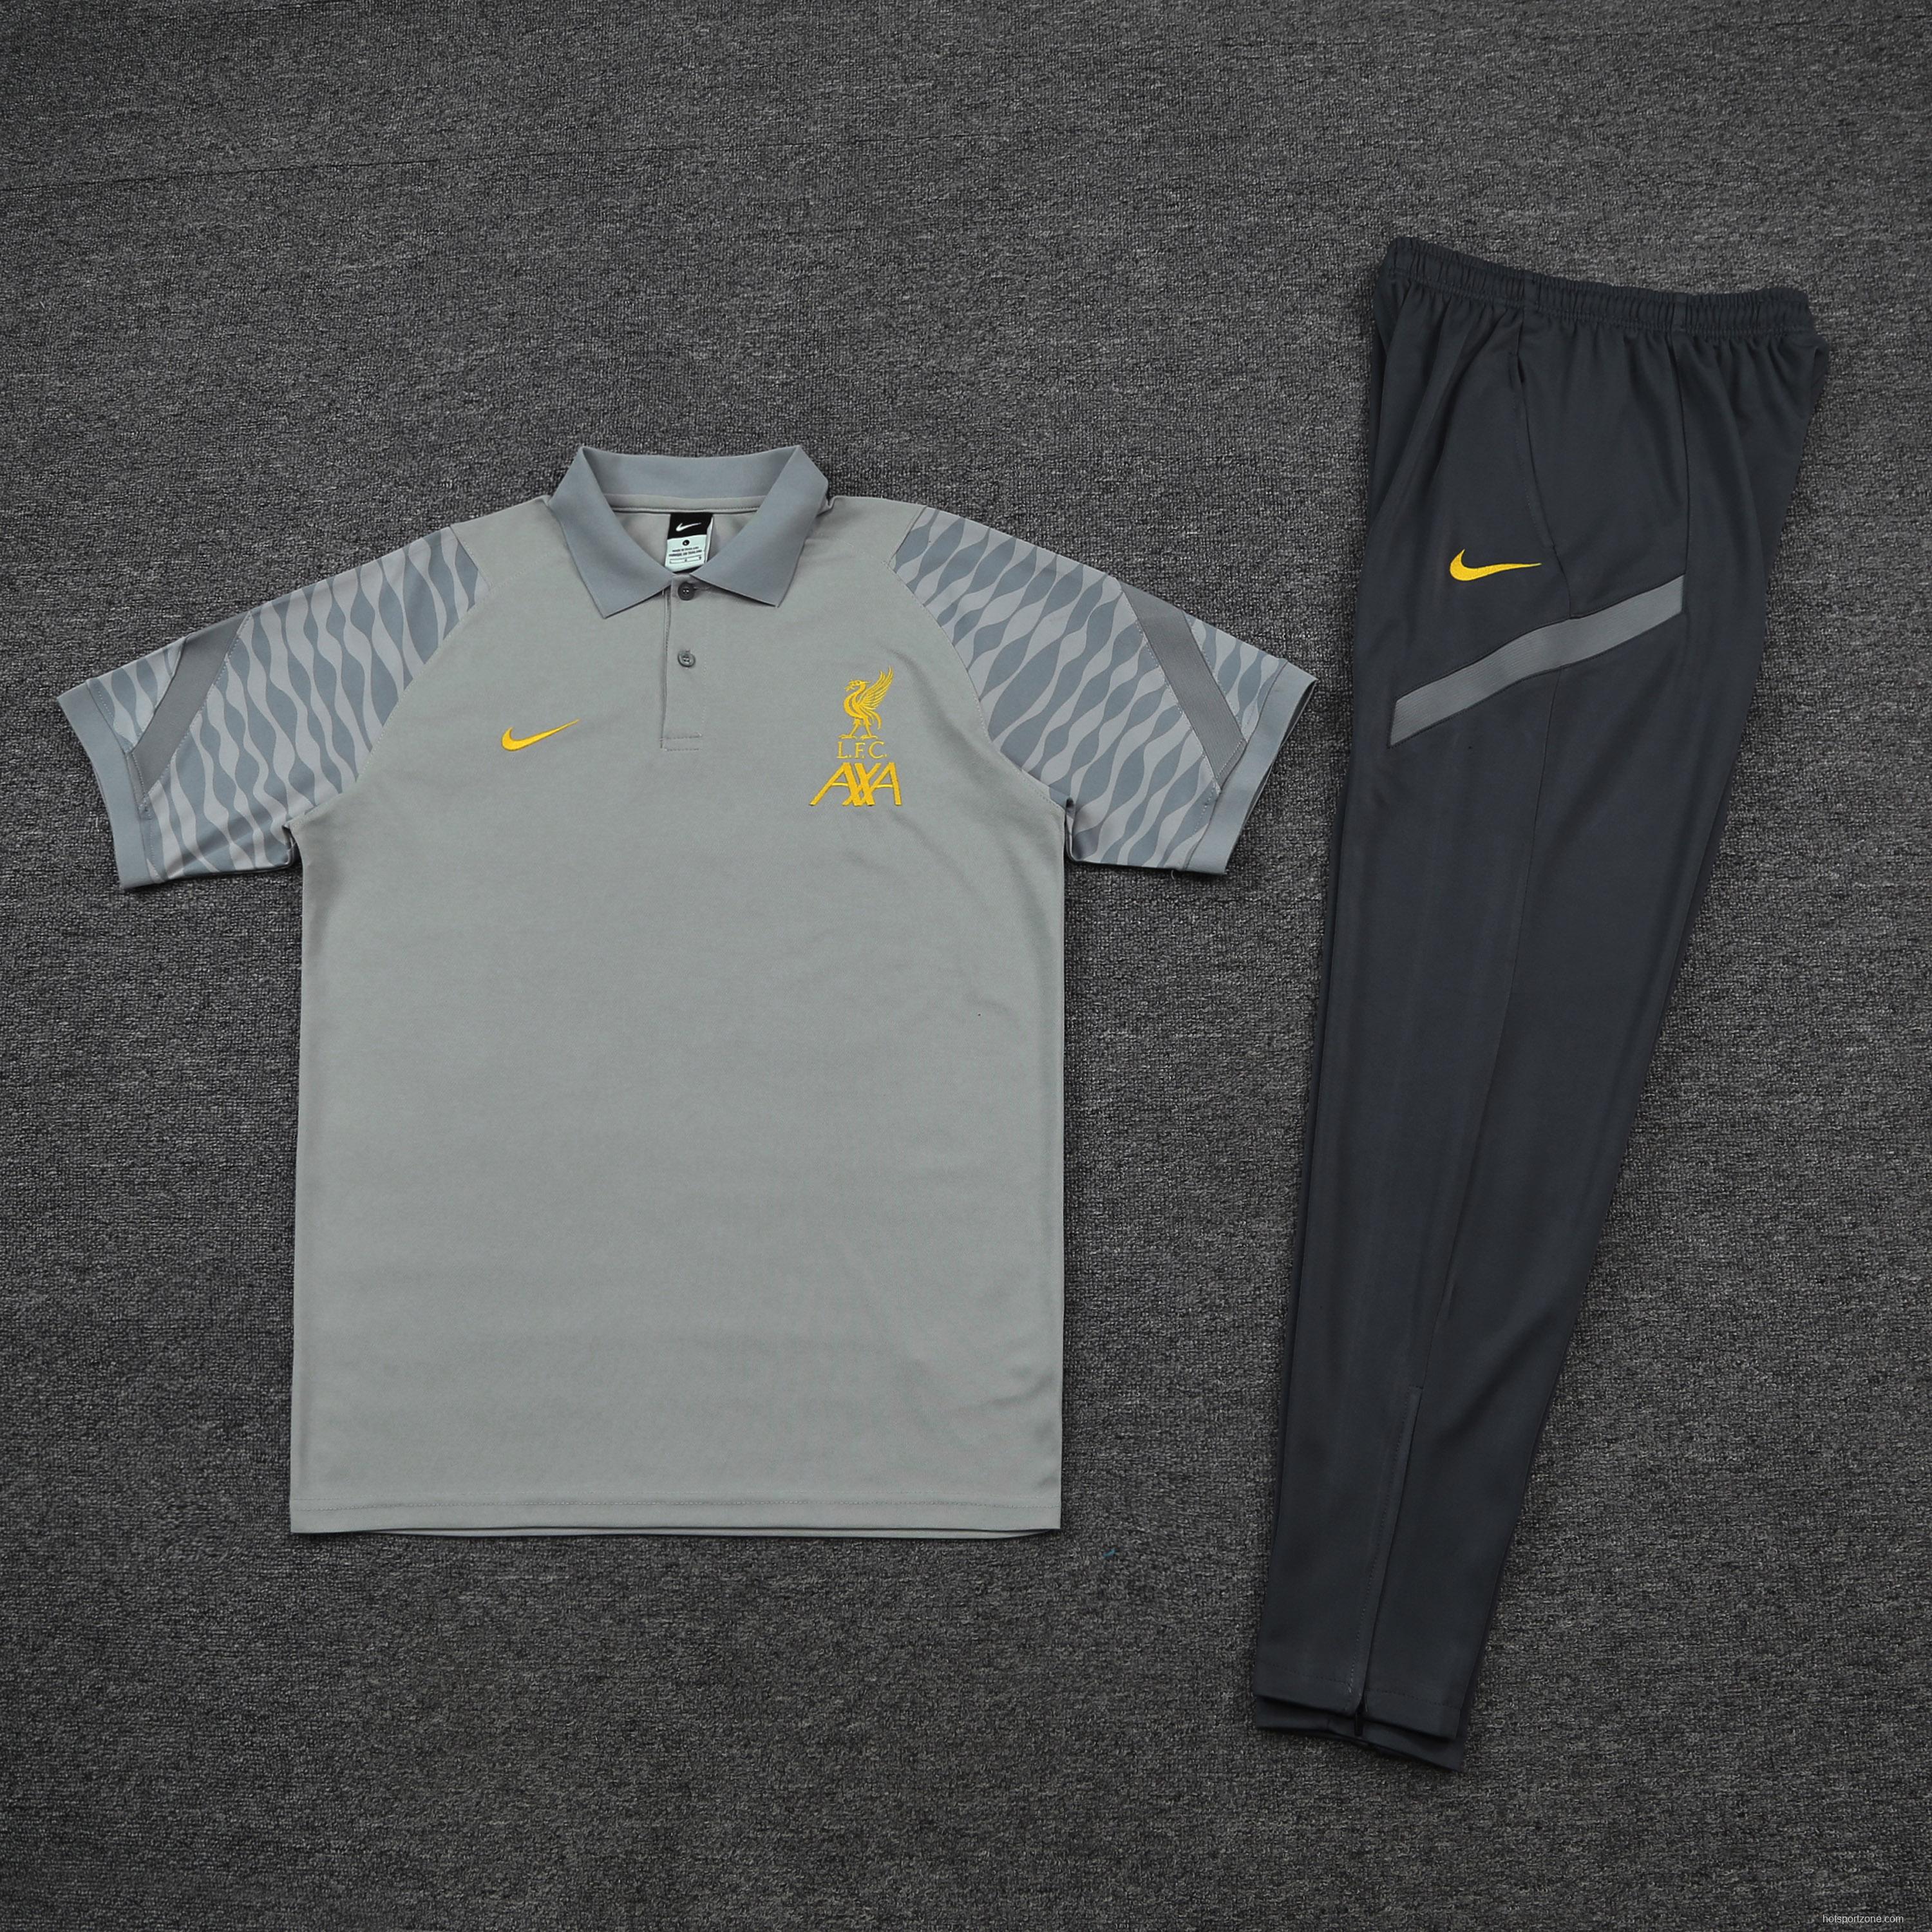 Liverpool POLO kit Dark Grey(not supported to be sold separately)